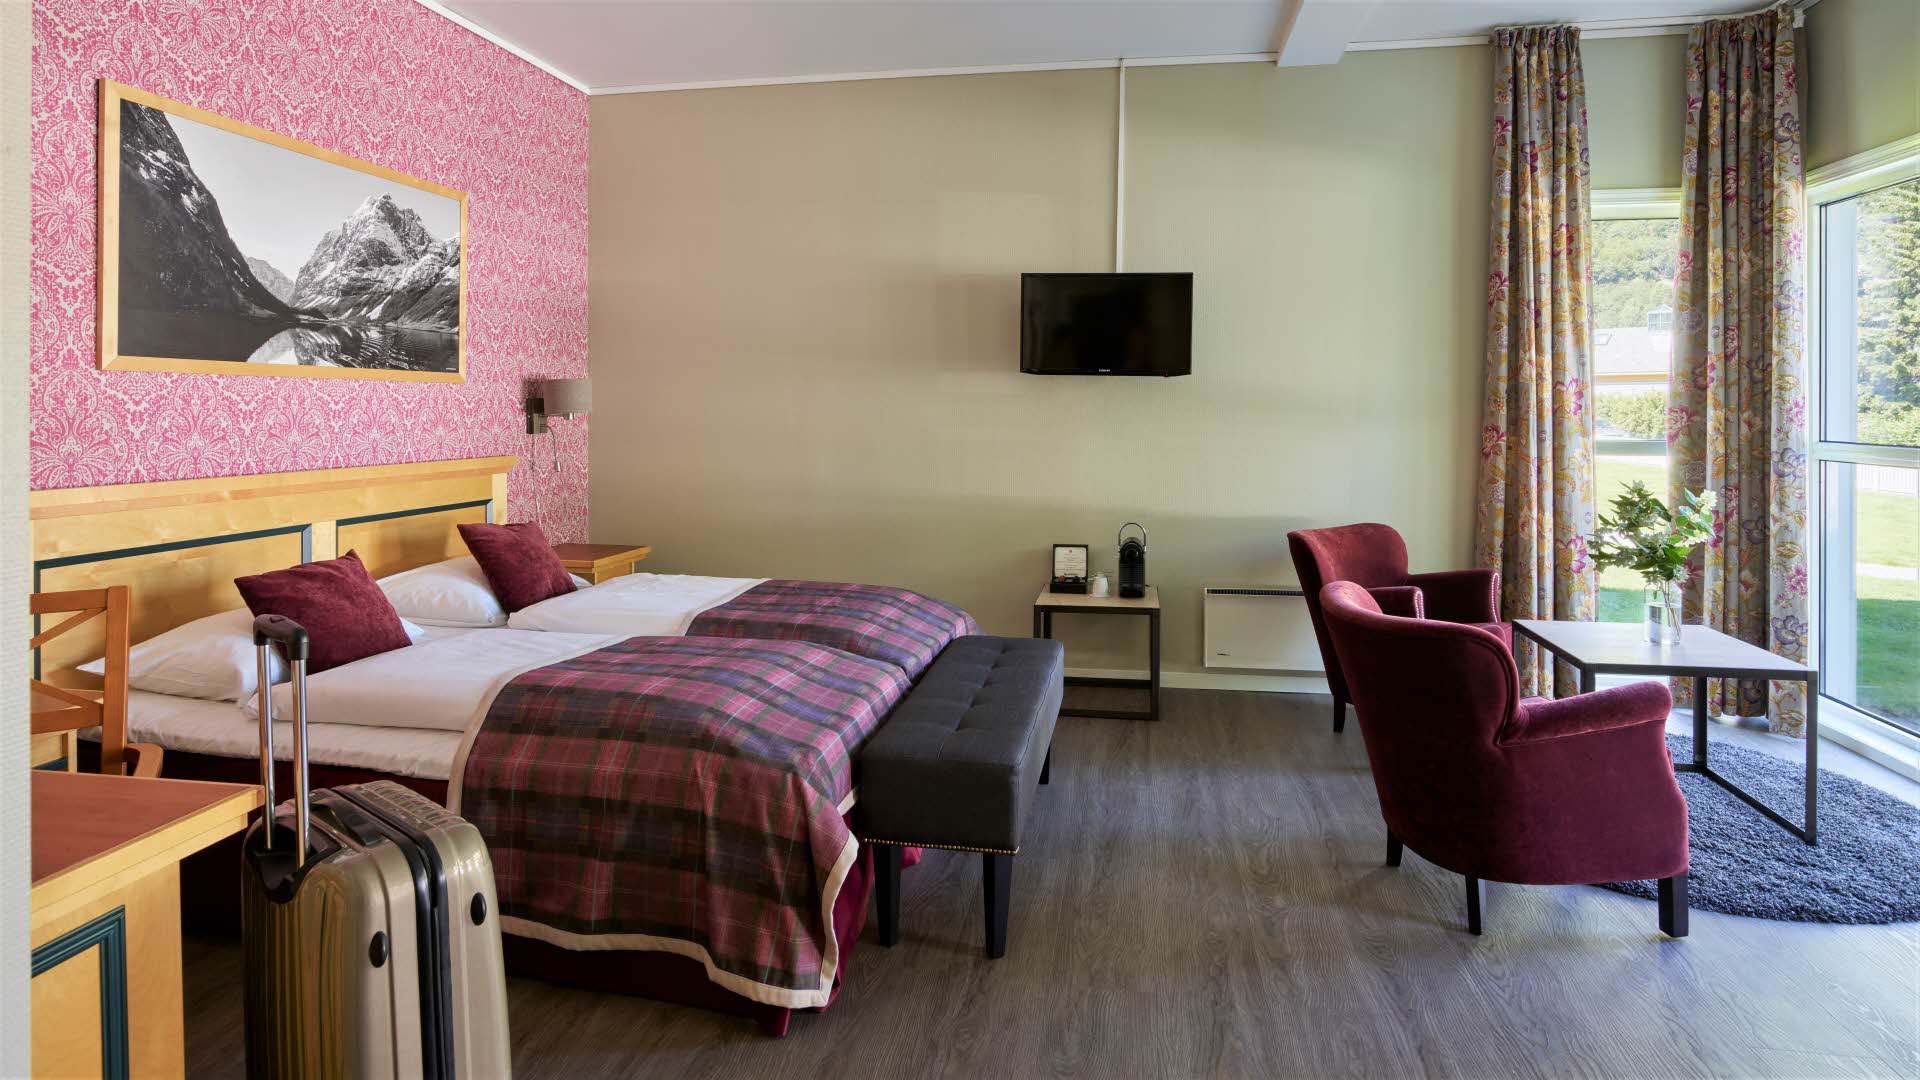 Junior suite at Fretheim Hotel showing twin beds, espresso machine and two red lounge chairs facing the windows by the garden. Suitcase standing in front. 